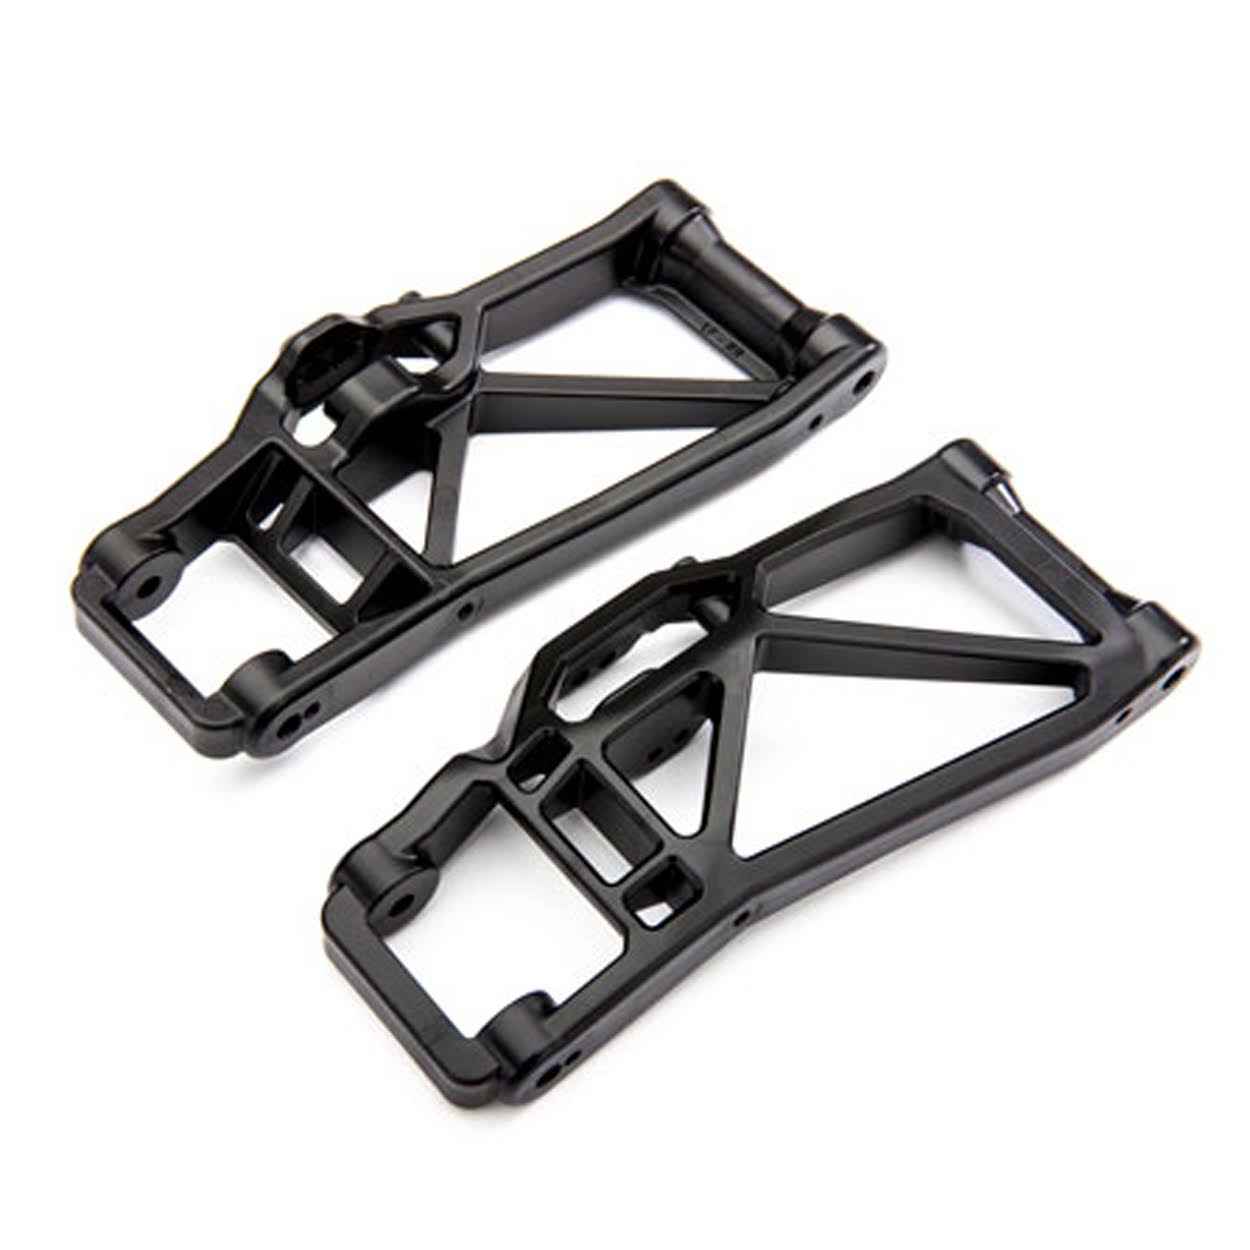 Traxxas Part 8930 Suspension Left or Right Arm Lower - Black